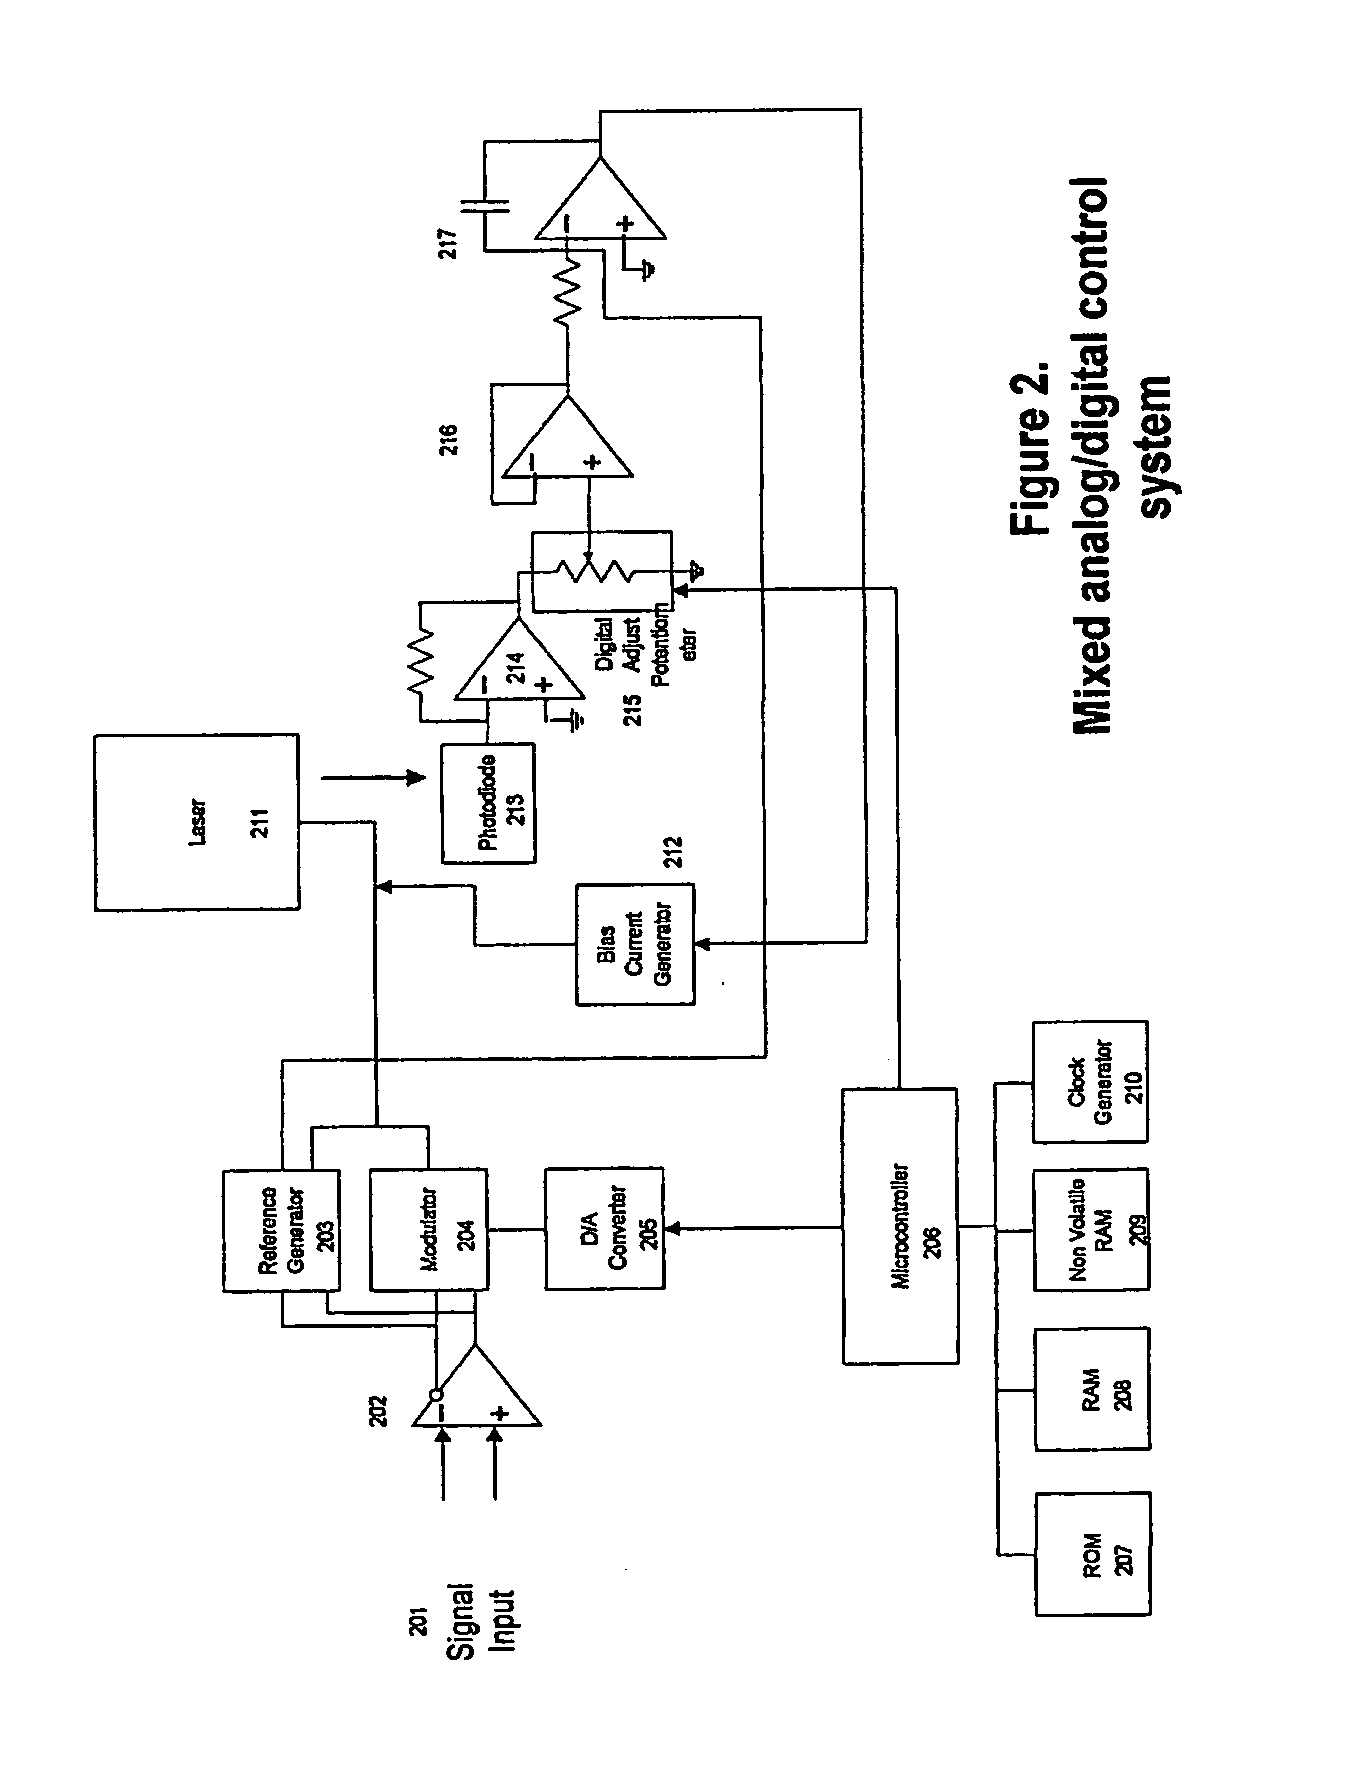 Laser optics integrated control system and method of operation